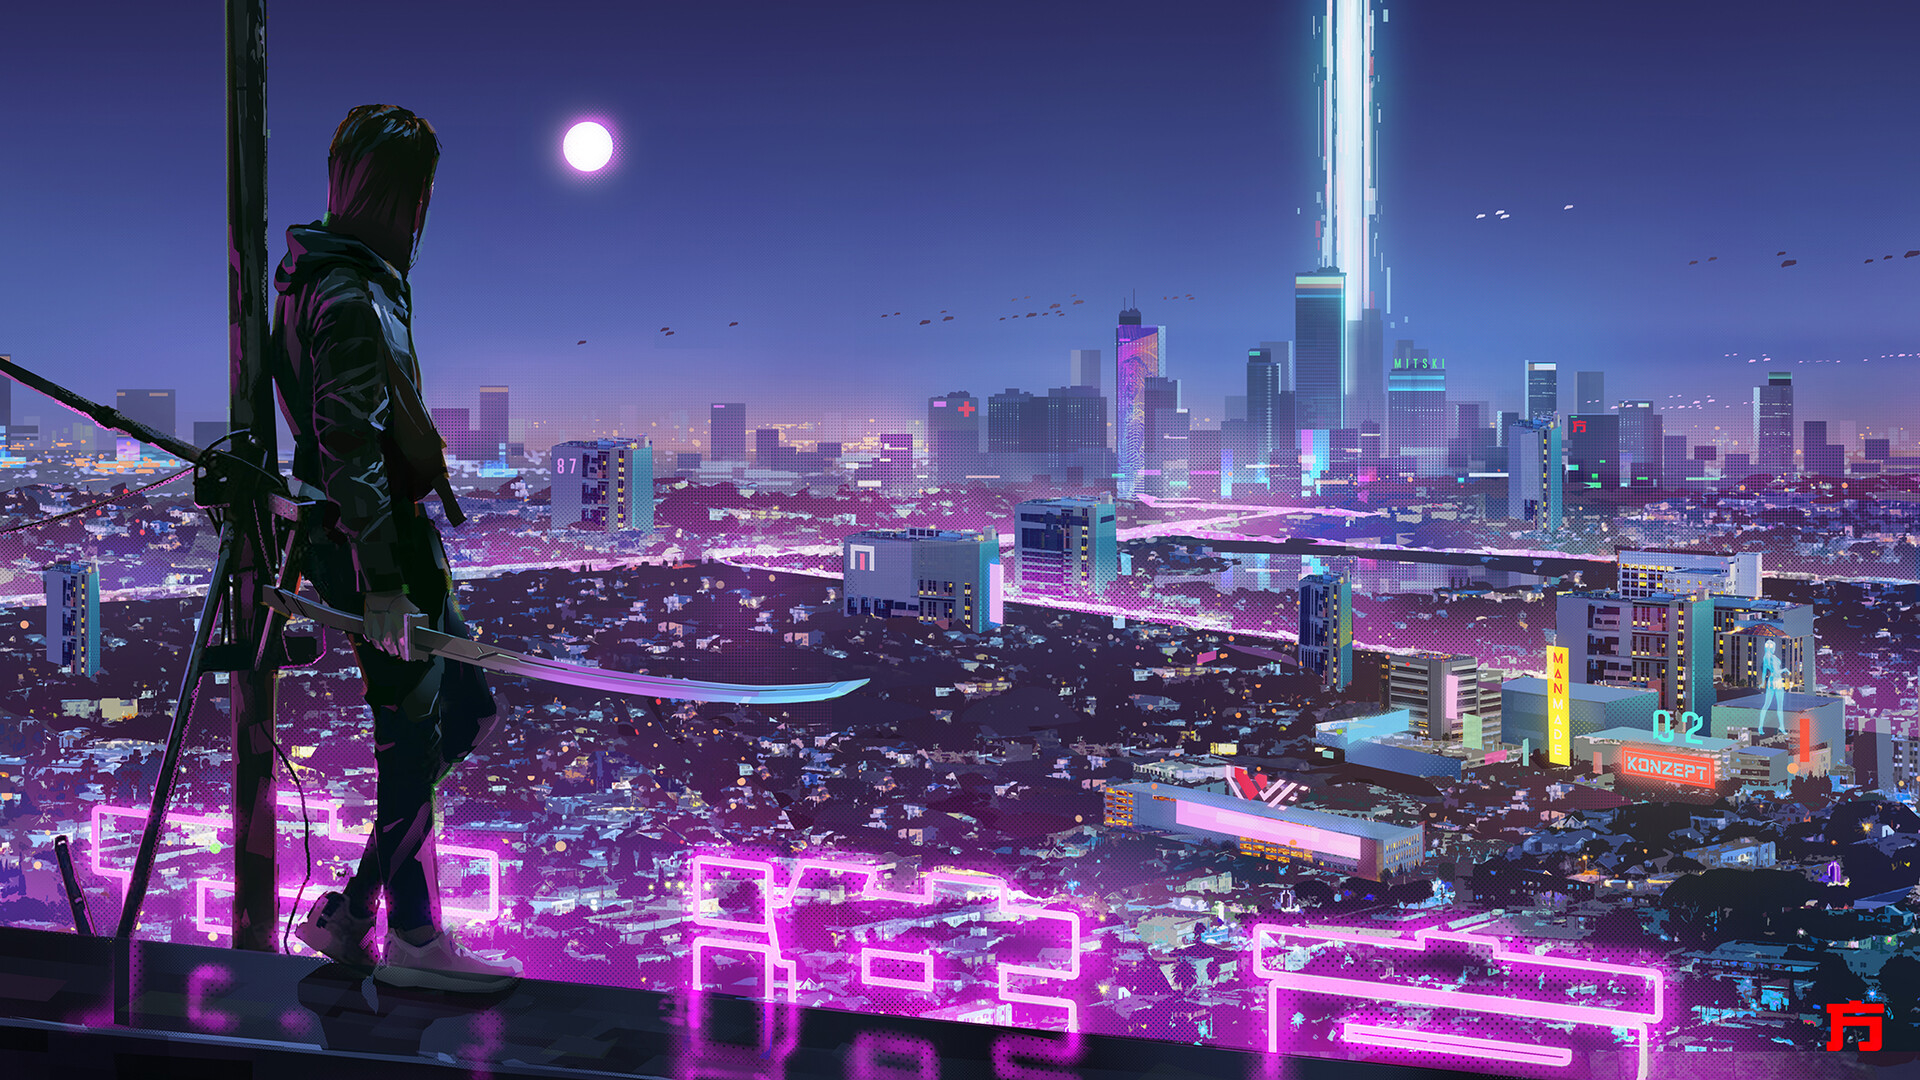 INVESTOR LOTTO GROUP PICK 3 THE FUTURE OF LOTTERY  Warrior-girl-in-cyberpunk-city_68859_1920x1080